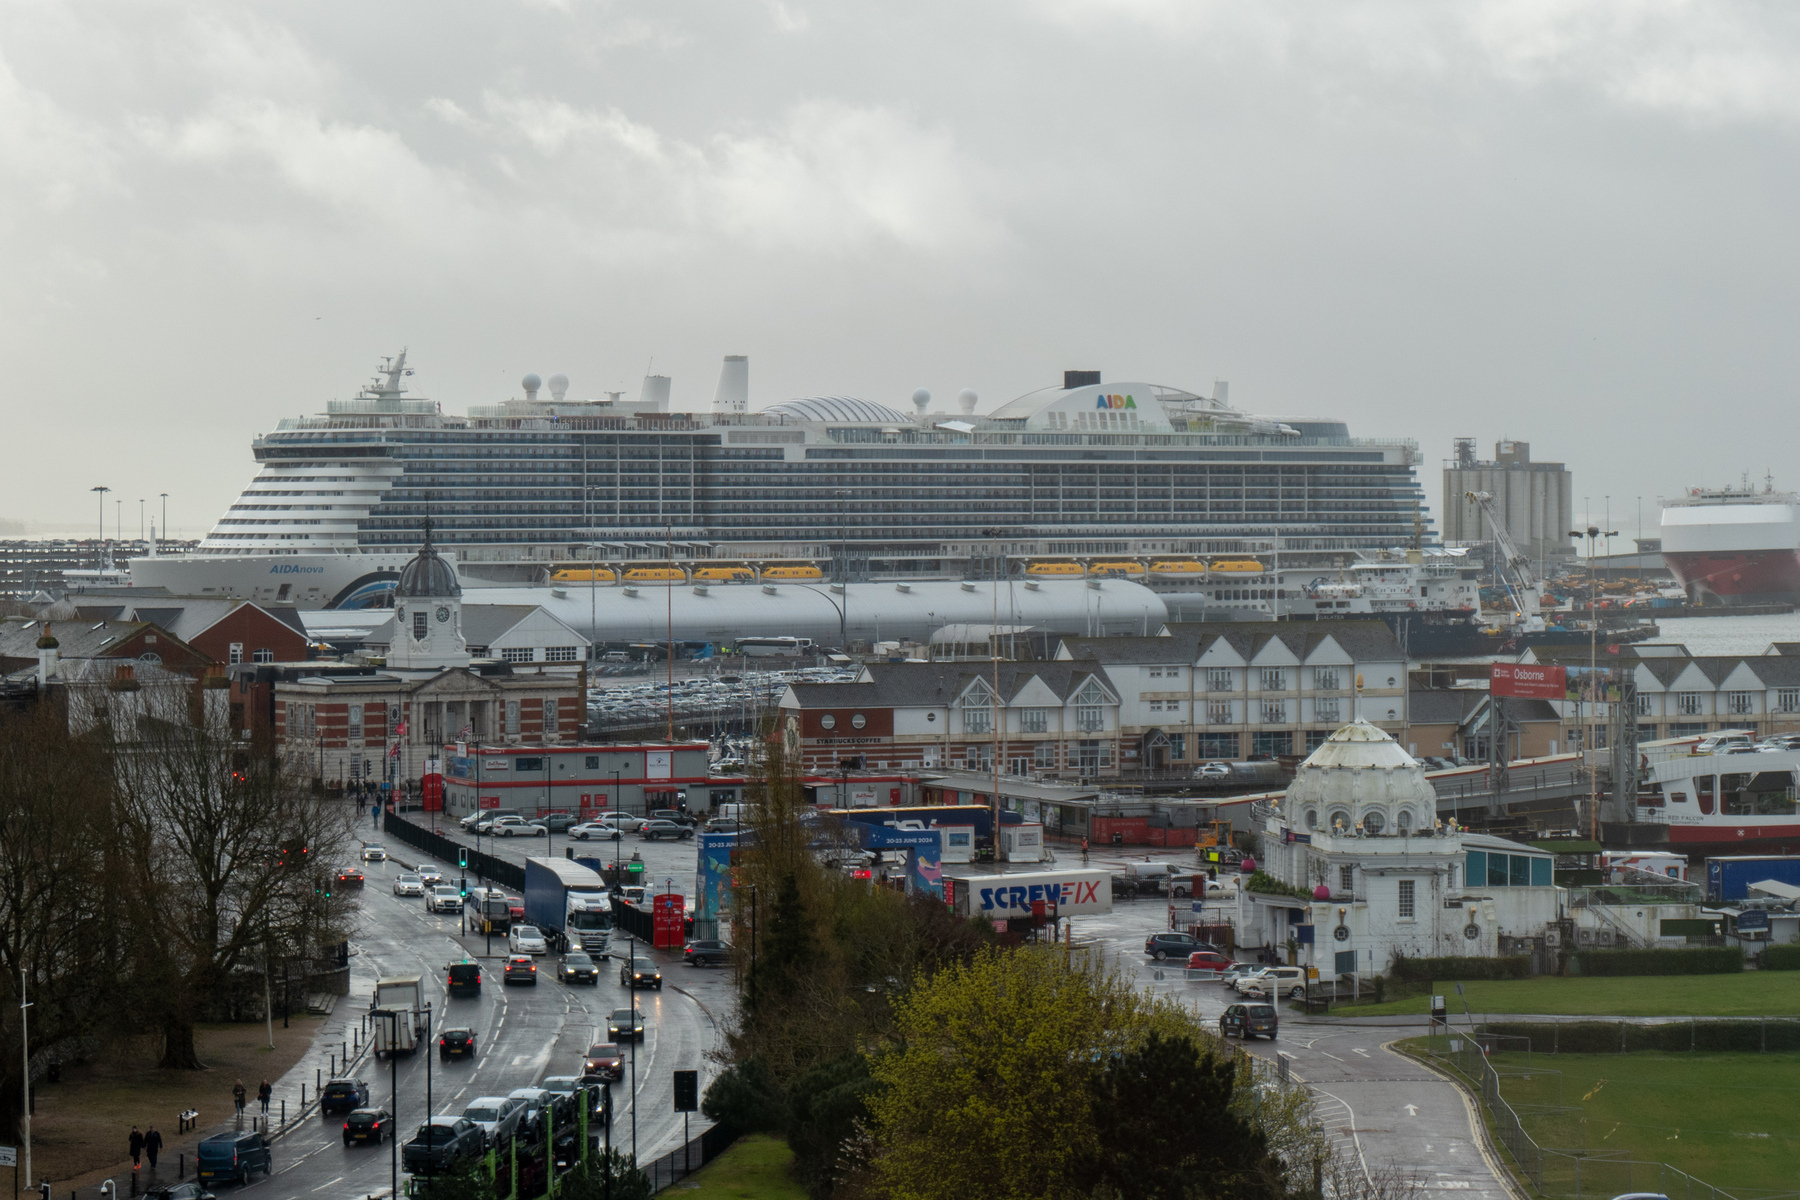 A giant ocean liner docked on Southampton.